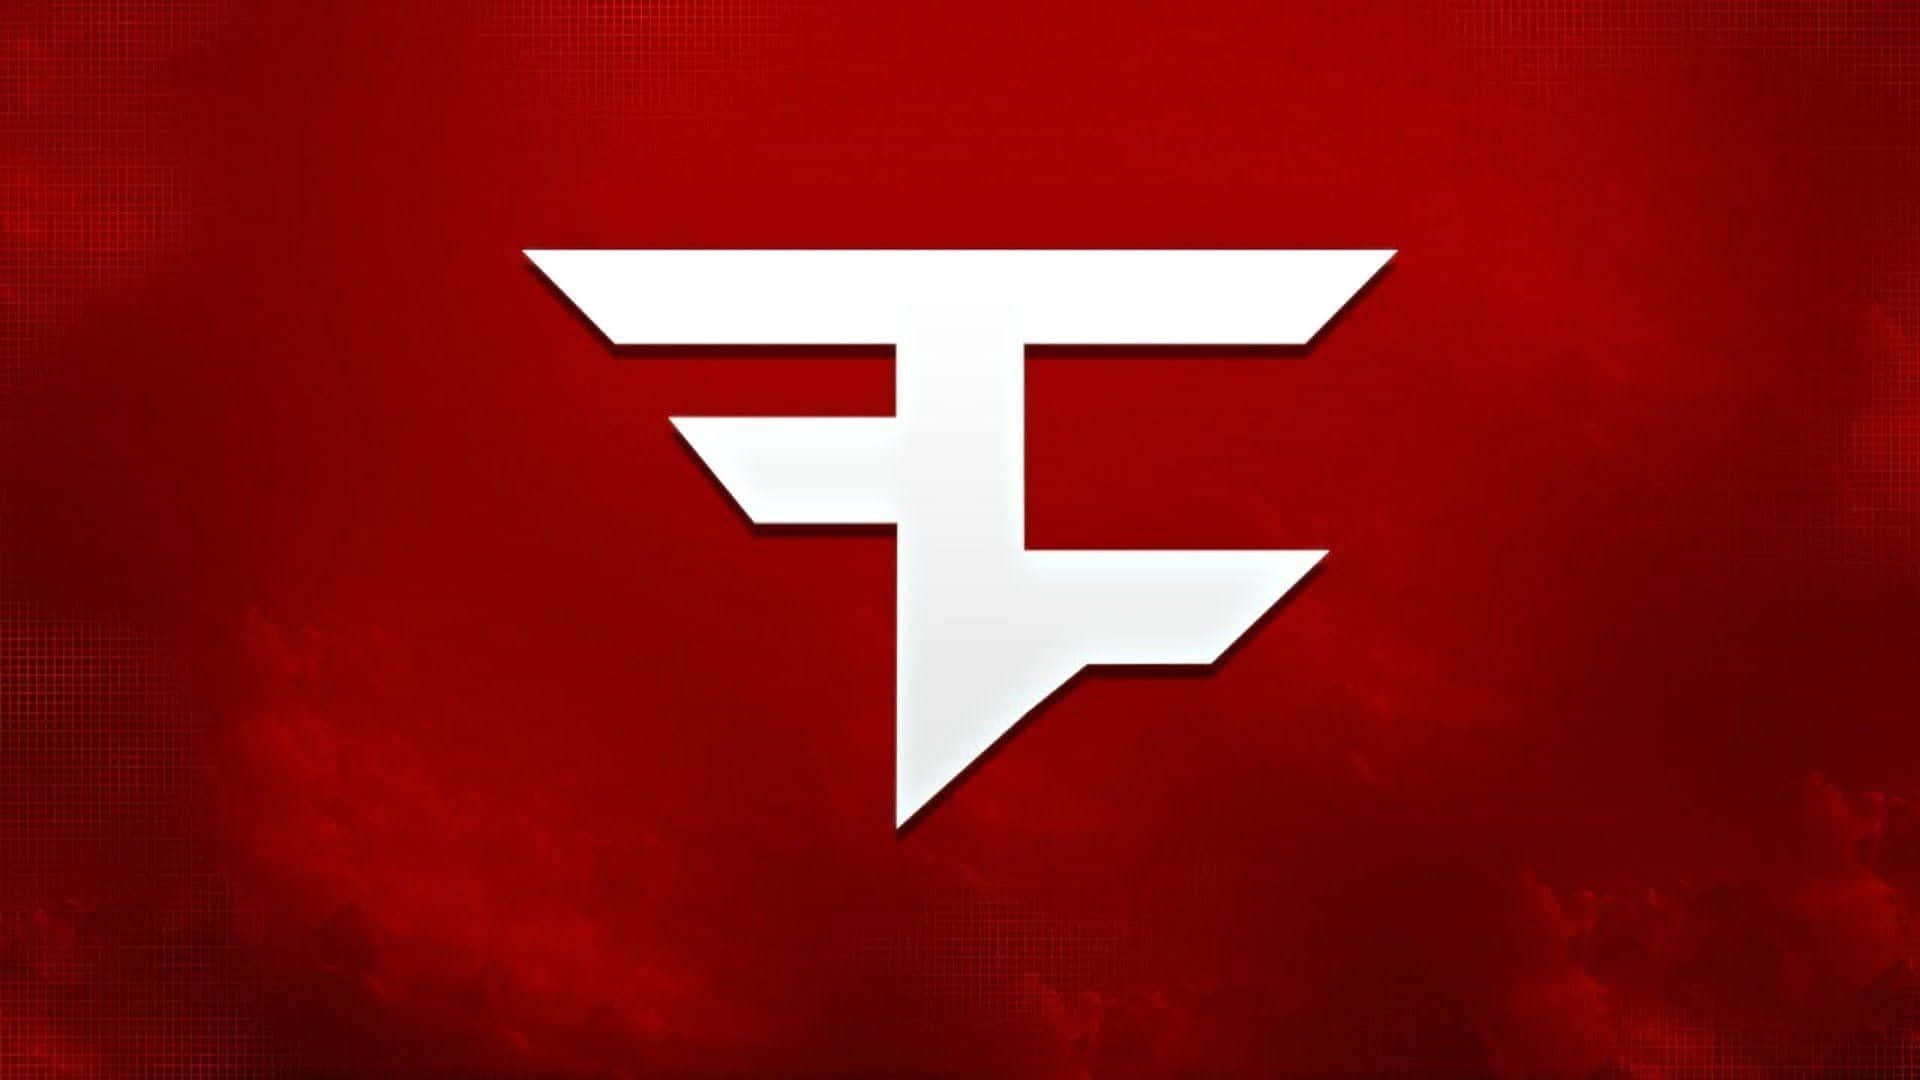 Faze Rug Red And White Wallpaper